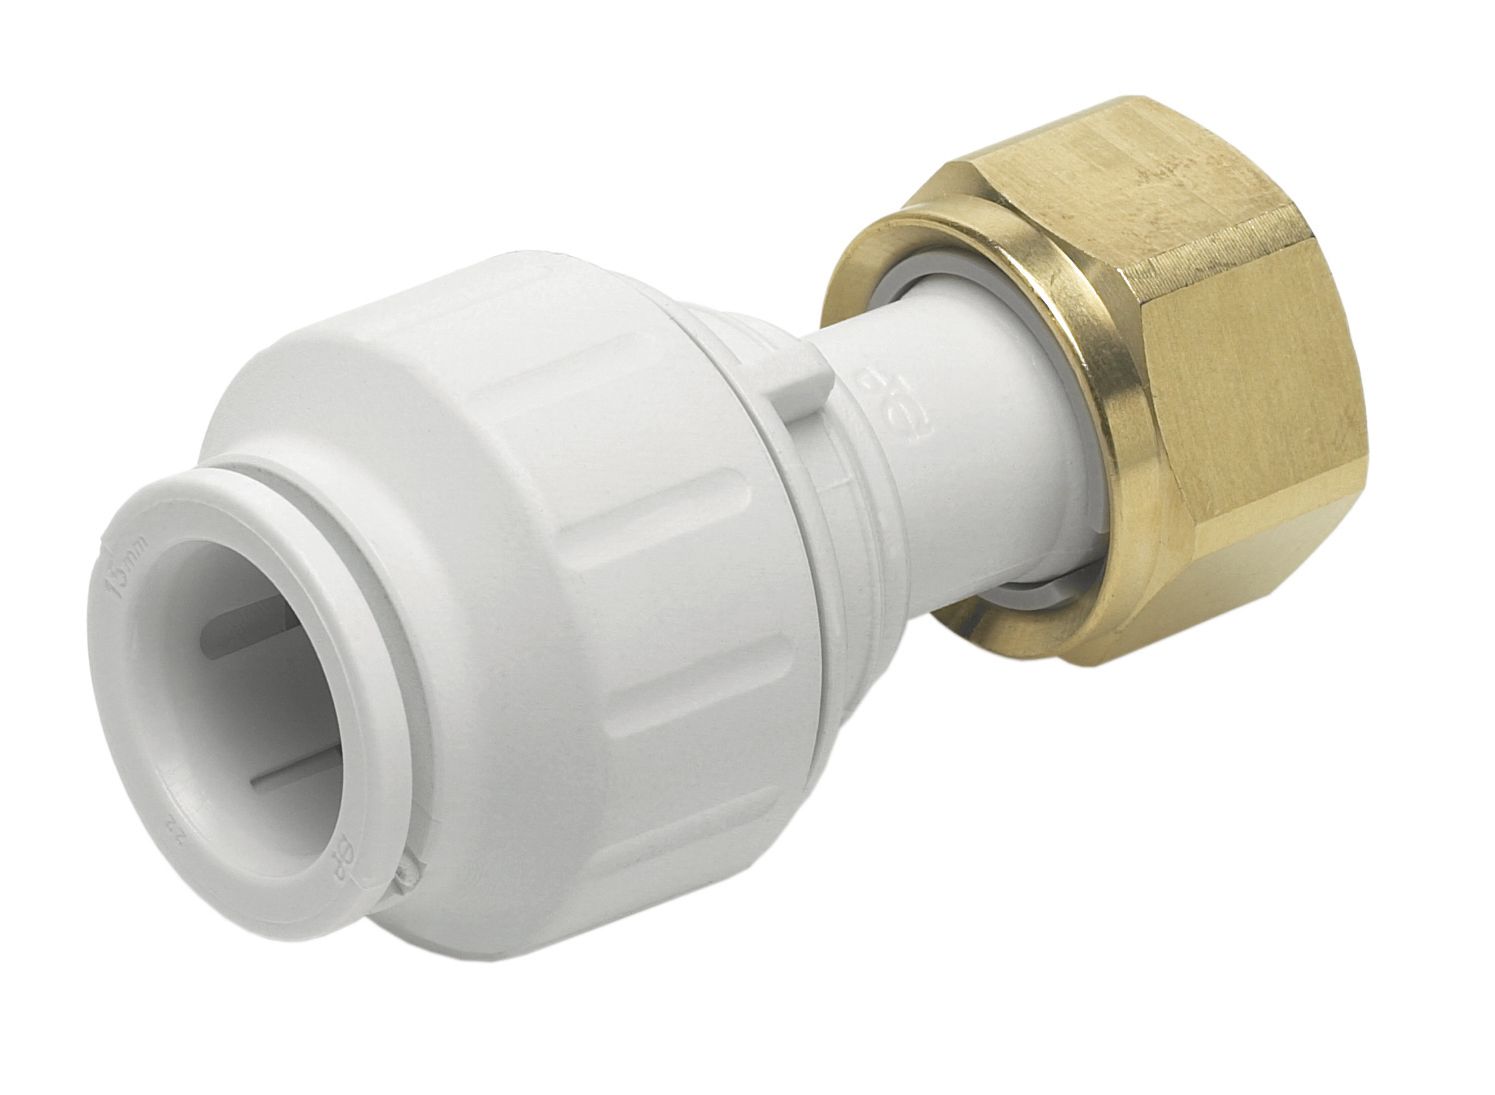 John Guest Speedfit PEMSTC2216P Straight Tap Connector - 19 x 22mm